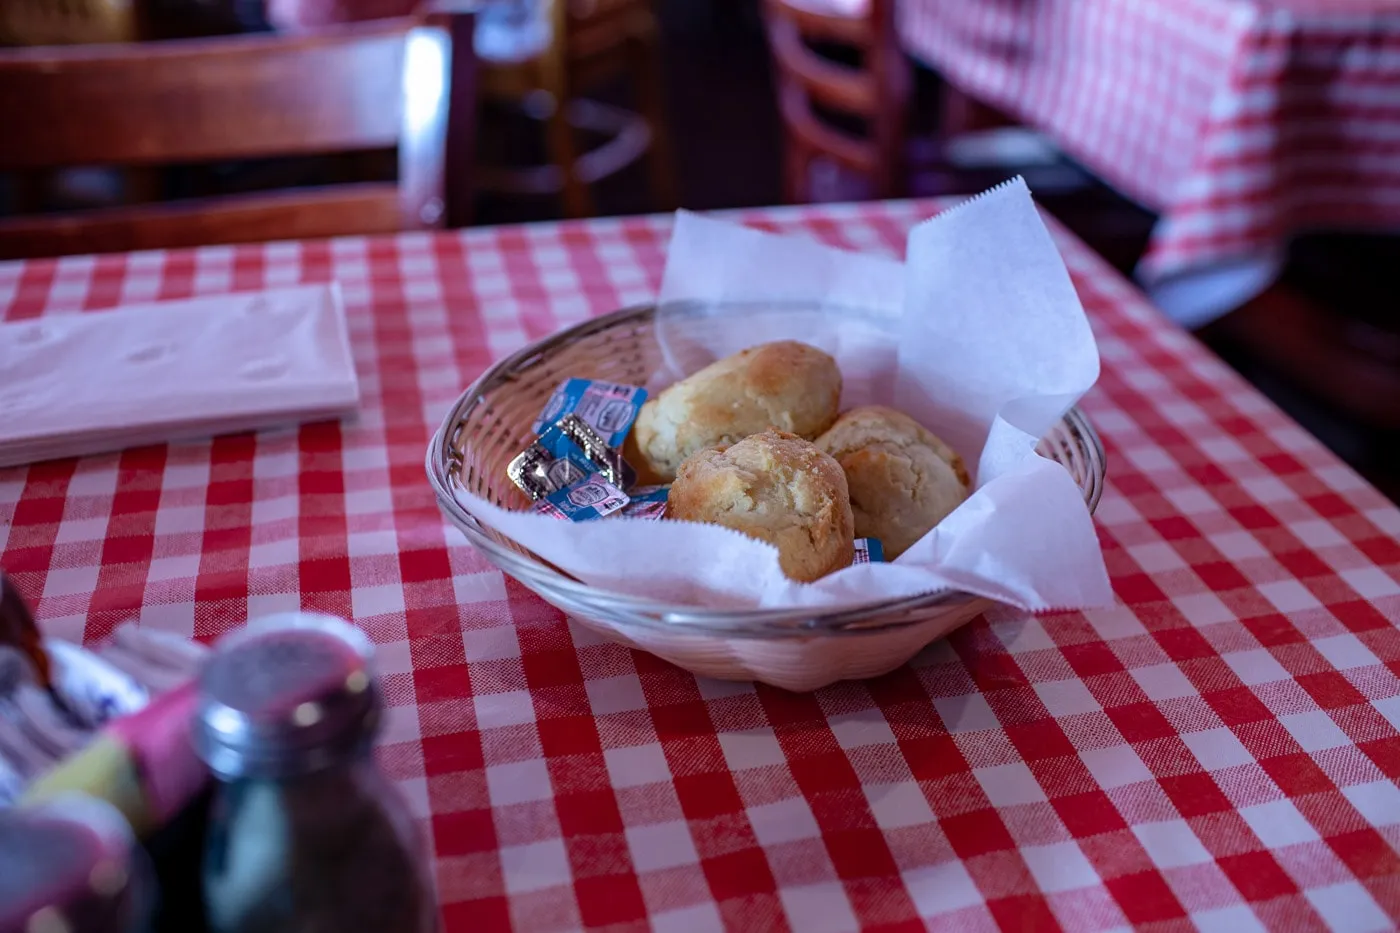 Biscuits at Dell Rhea's Chicken Basket restaurant on Route 66 in Illinois.